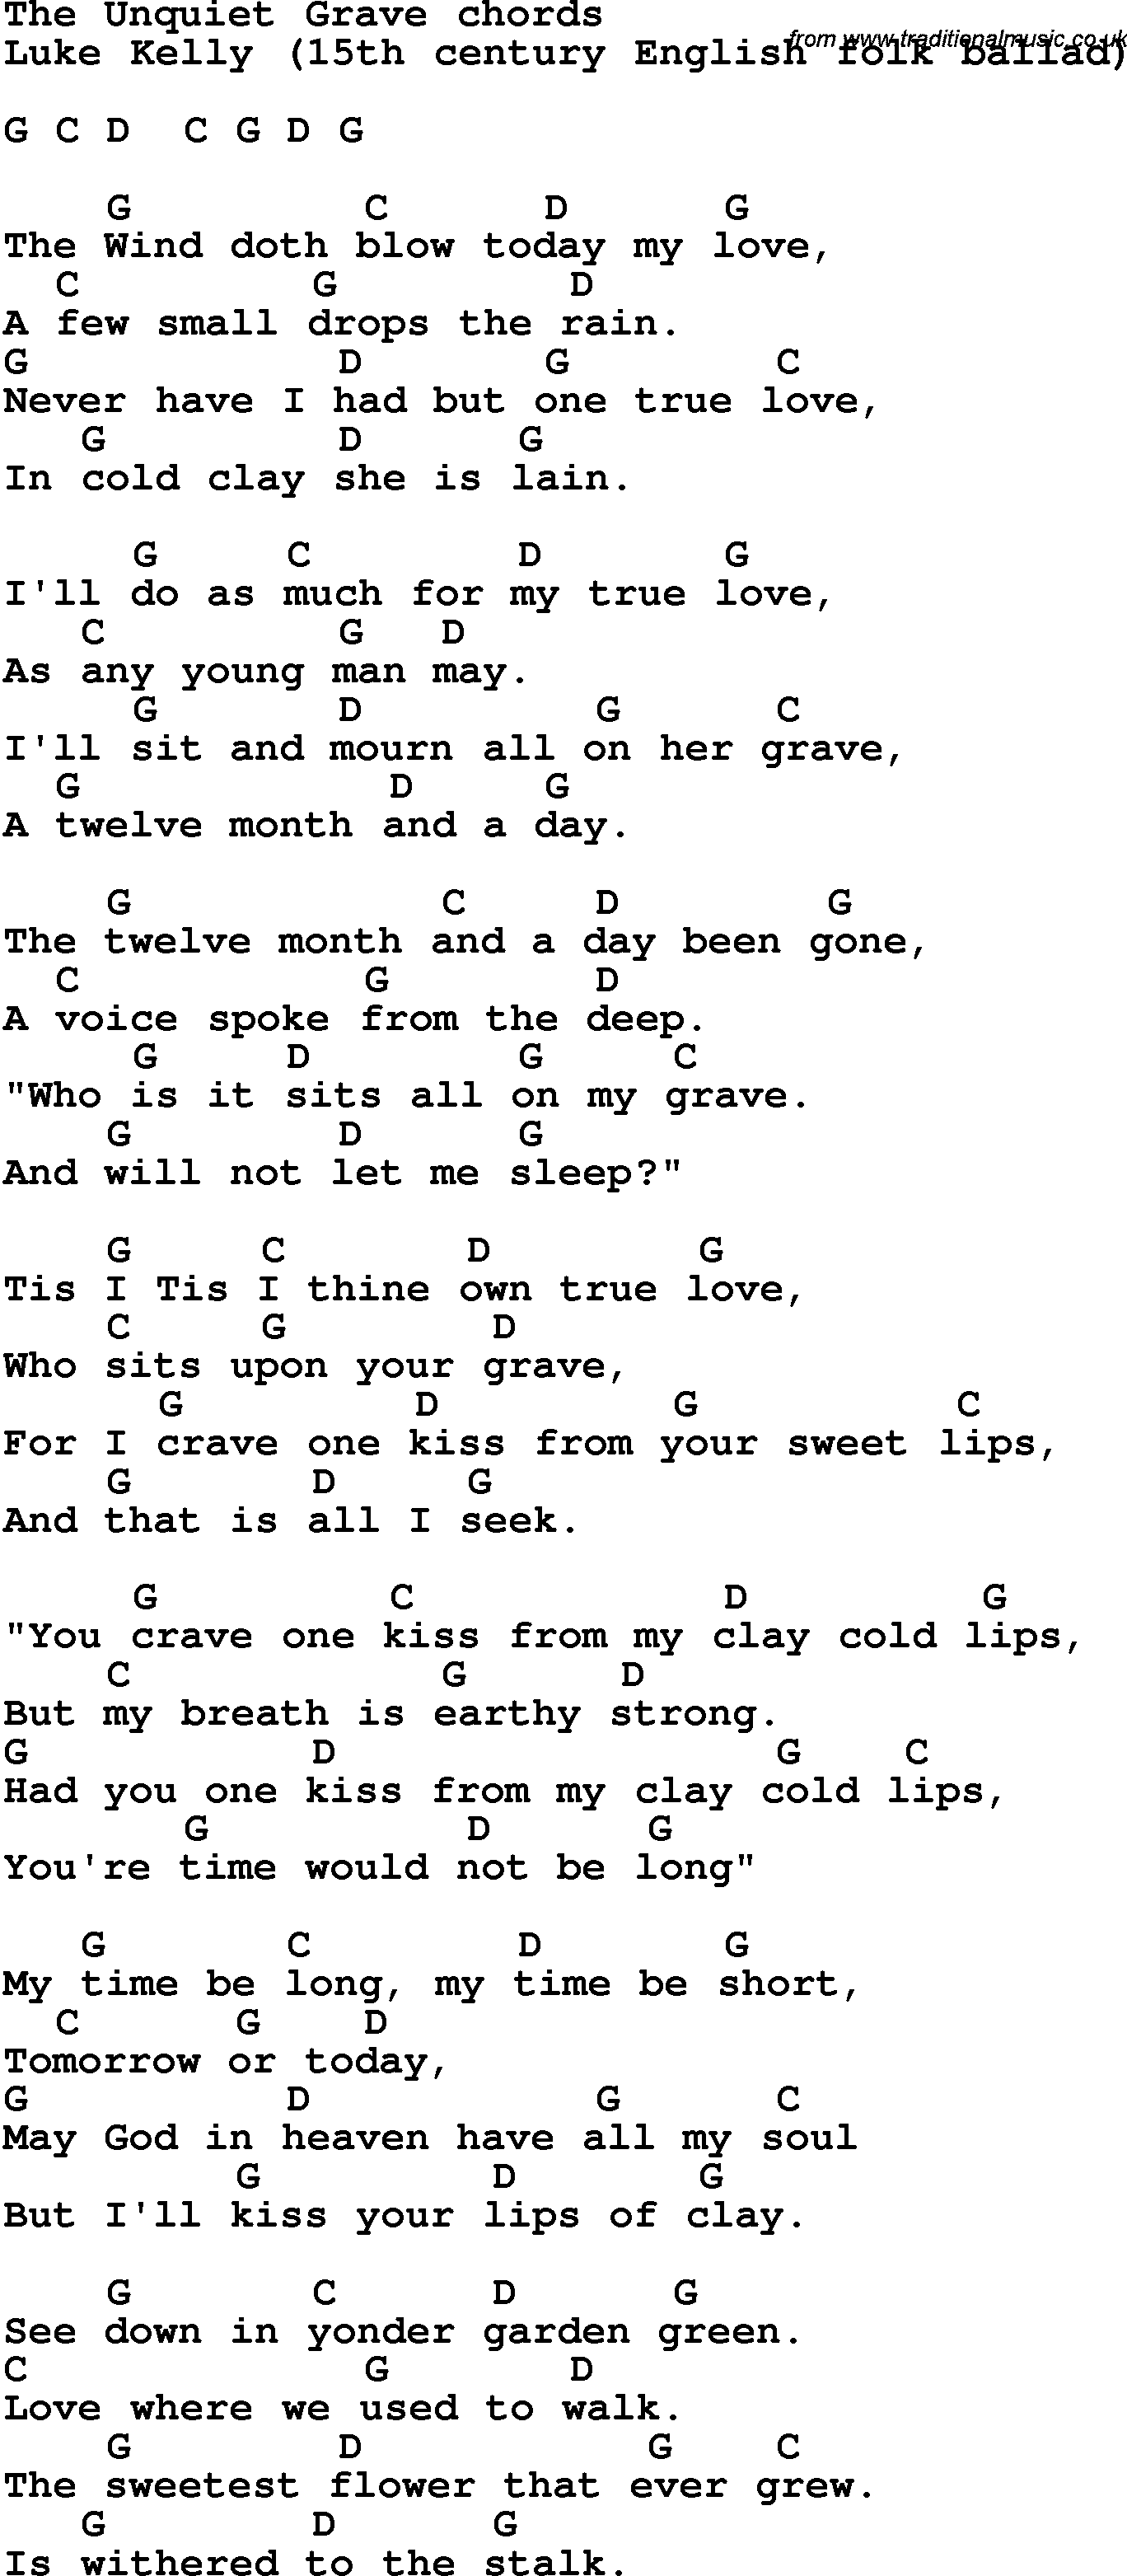 Song Lyrics with guitar chords for The Unquiet Grave - Luke Kelly-trad